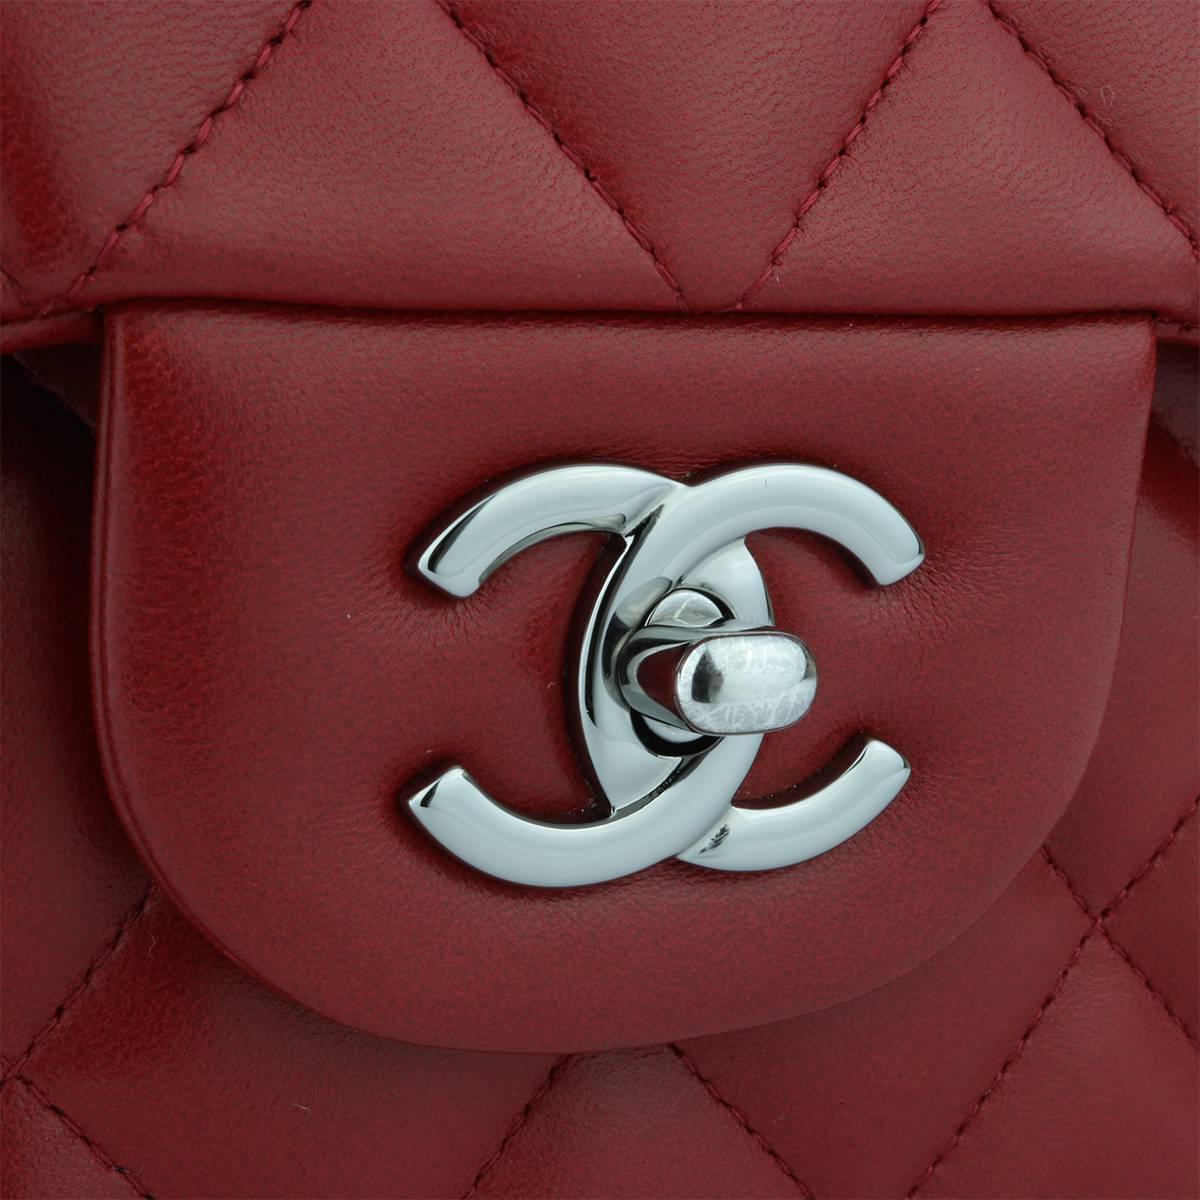 Authentic CHANEL Classic Double Flap Jumbo Lipstick Red Lambskin with Light Gunmetal Hardware 2014.

This stunning bag is in a mint condition, the bag still holds its original shape, and the hardware is still very shiny. Leather smells fresh as if